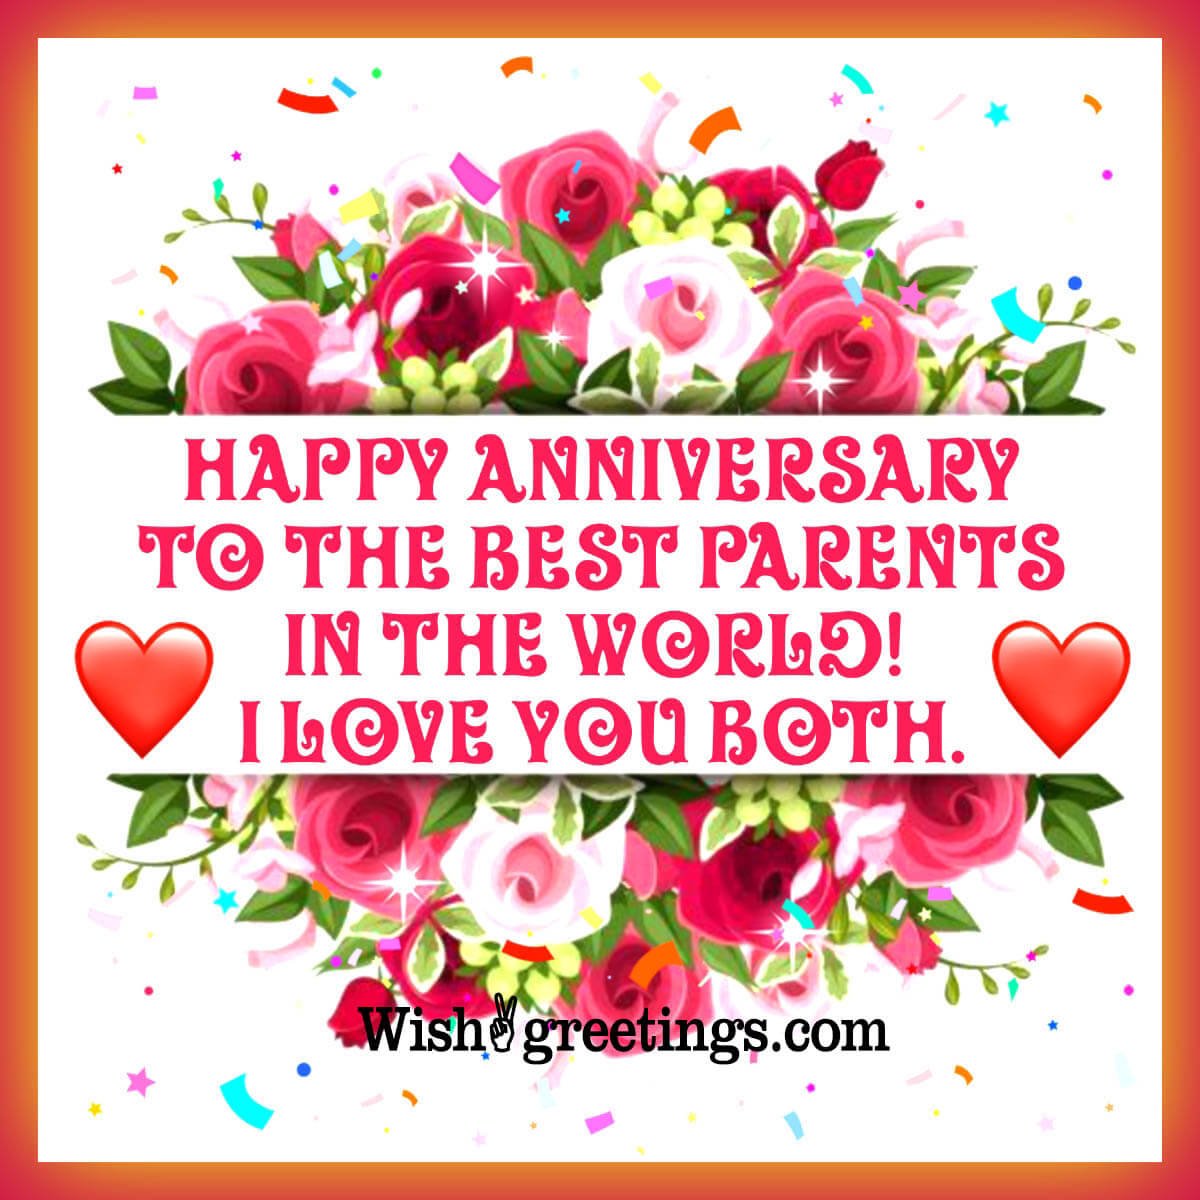 Happy Anniversary Wishes Images For Parents Wish Greetings